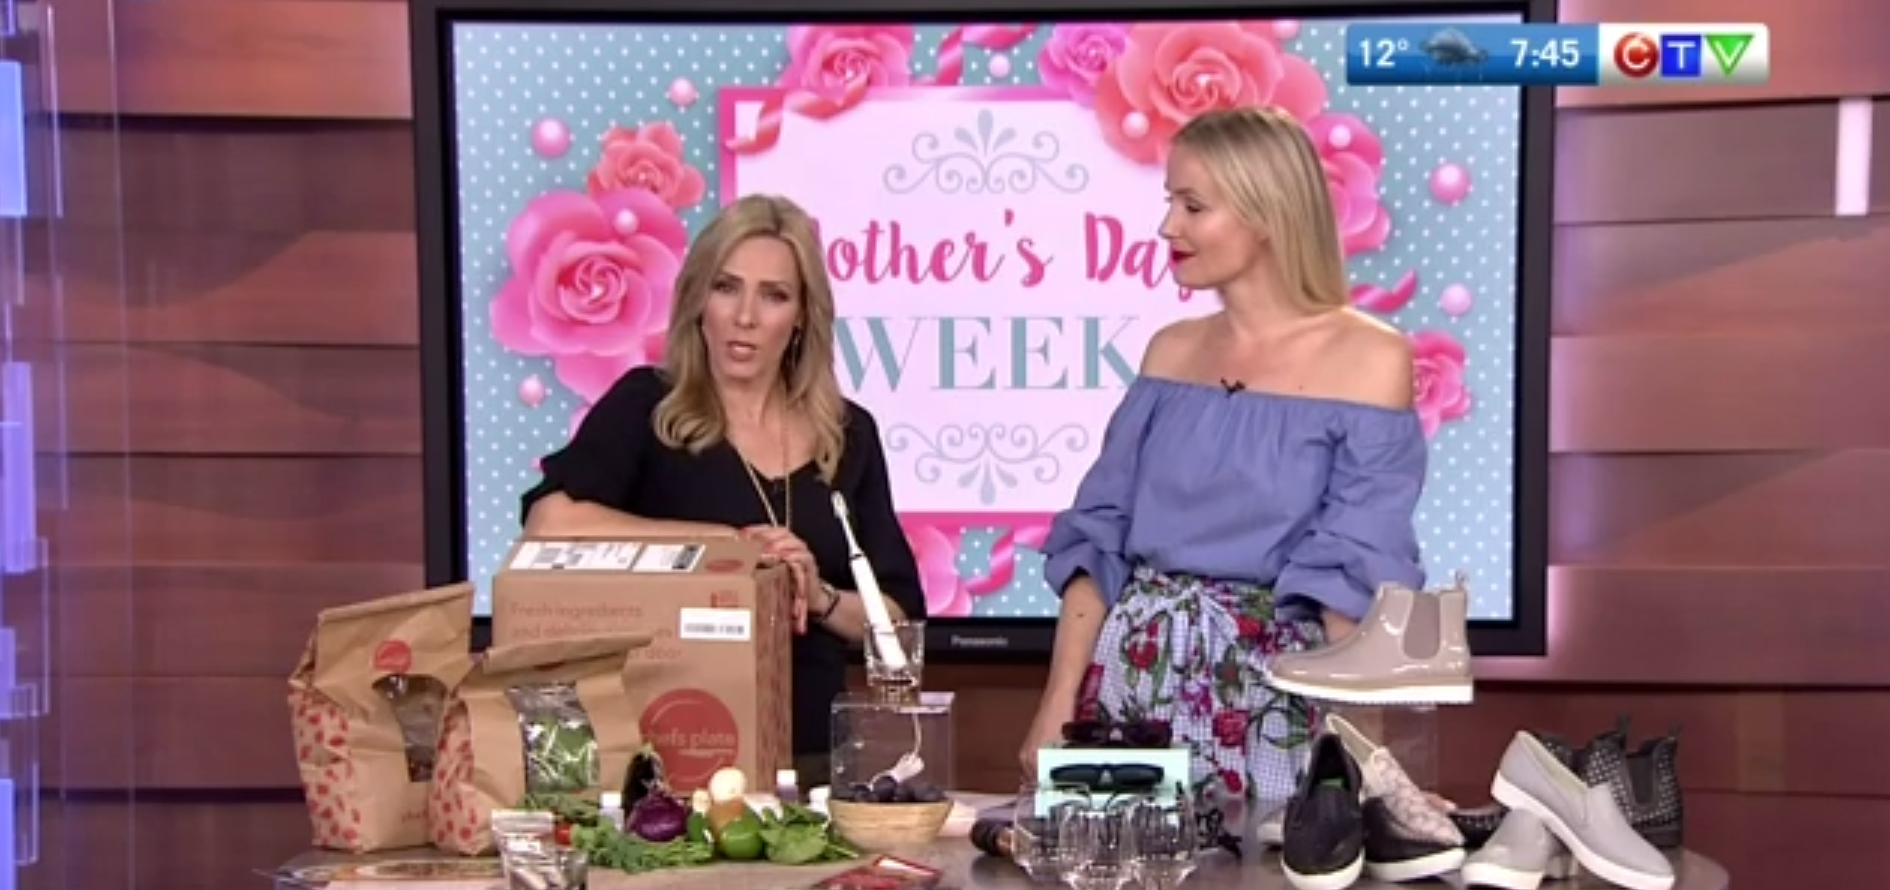 Mother's Day Gift Ideas – Morning Live Vancouver